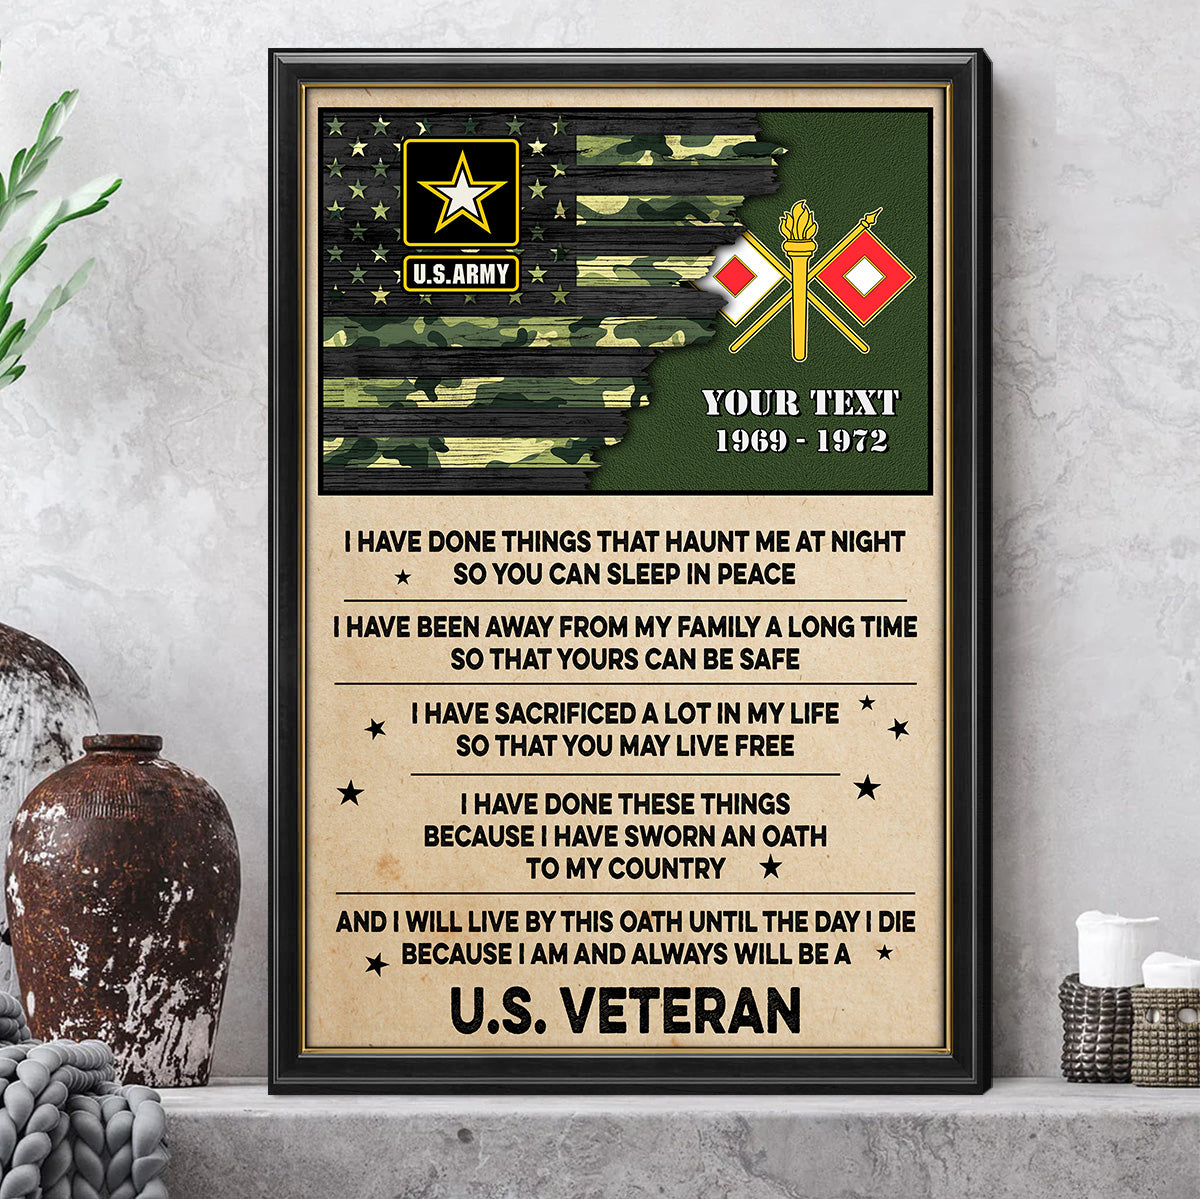 Personalized Poster Canvas Frame Wall Art Home Decor For Veterans I Am And Always Be A U.S. Veteran K1702